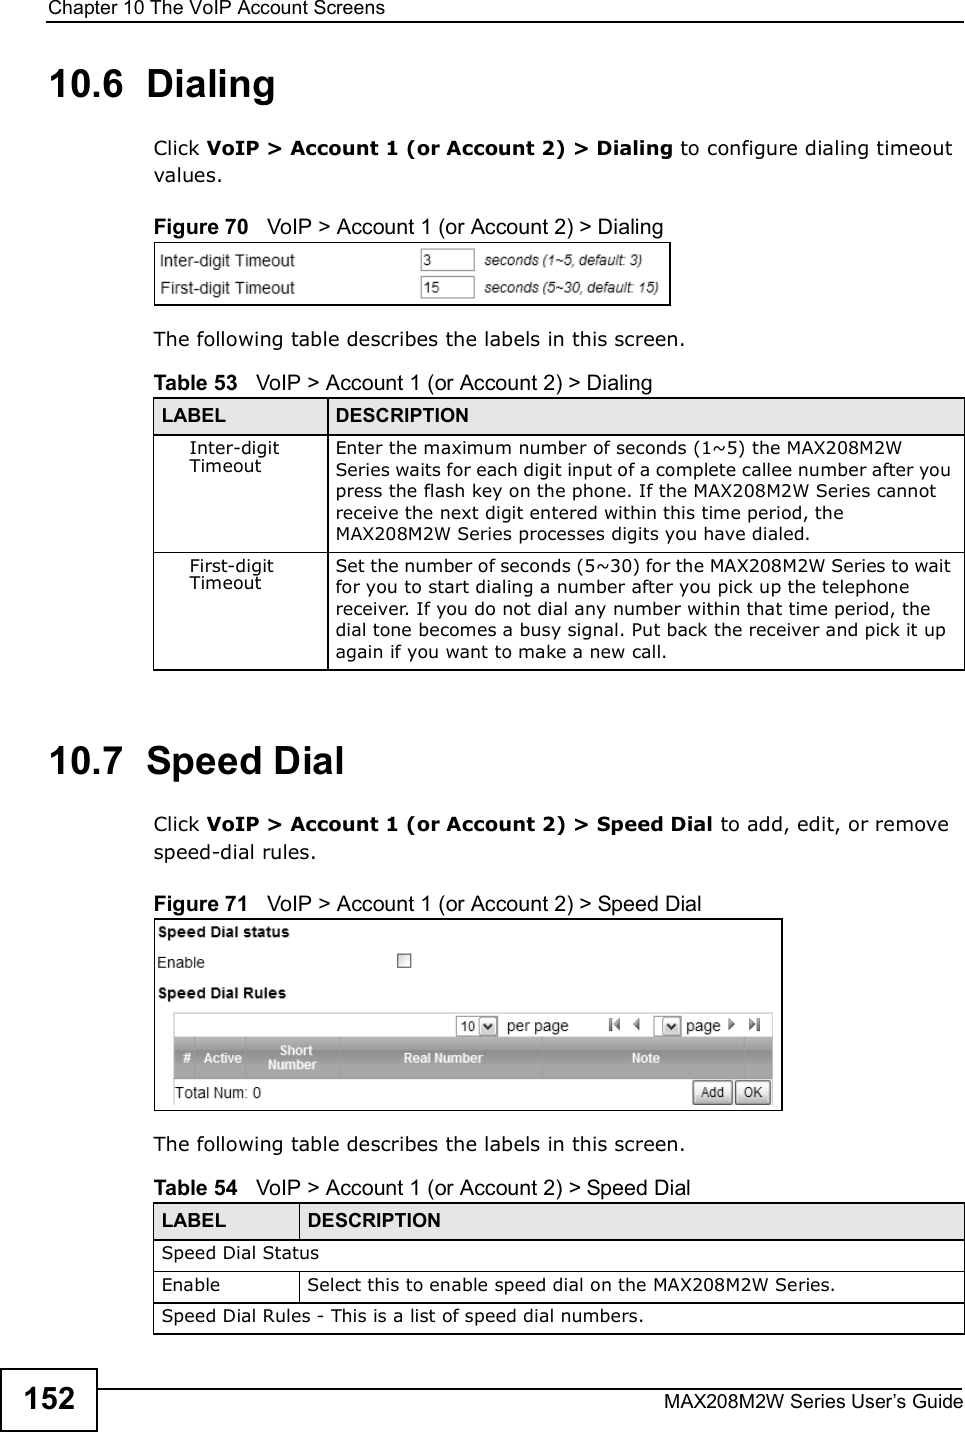 Chapter 10The VoIP Account ScreensMAX208M2W Series User s Guide15210.6  DialingClick VoIP &gt; Account 1 (or Account 2) &gt; Dialing to configure dialing timeout values.Figure 70   VoIP &gt; Account 1 (or Account 2) &gt; DialingThe following table describes the labels in this screen.10.7  Speed DialClick VoIP &gt; Account 1 (or Account 2) &gt; Speed Dial to add, edit, or remove speed-dial rules.Figure 71   VoIP &gt; Account 1 (or Account 2) &gt; Speed DialThe following table describes the labels in this screen.  Table 53   VoIP &gt; Account 1 (or Account 2) &gt; DialingLABEL DESCRIPTIONInter-digit TimeoutEnter the maximum number of seconds (1~5) the MAX208M2W Series waits for each digit input of a complete callee number after you press the flash key on the phone. If the MAX208M2W Series cannot receive the next digit entered within this time period, the MAX208M2W Series processes digits you have dialed.First-digit TimeoutSet the number of seconds (5~30) for the MAX208M2W Series to wait for you to start dialing a number after you pick up the telephone receiver. If you do not dial any number within that time period, the dial tone becomes a busy signal. Put back the receiver and pick it up again if you want to make a new call.Table 54   VoIP &gt; Account 1 (or Account 2) &gt; Speed DialLABEL DESCRIPTIONSpeed Dial StatusEnableSelect this to enable speed dial on the MAX208M2W Series.Speed Dial Rules - This is a list of speed dial numbers.